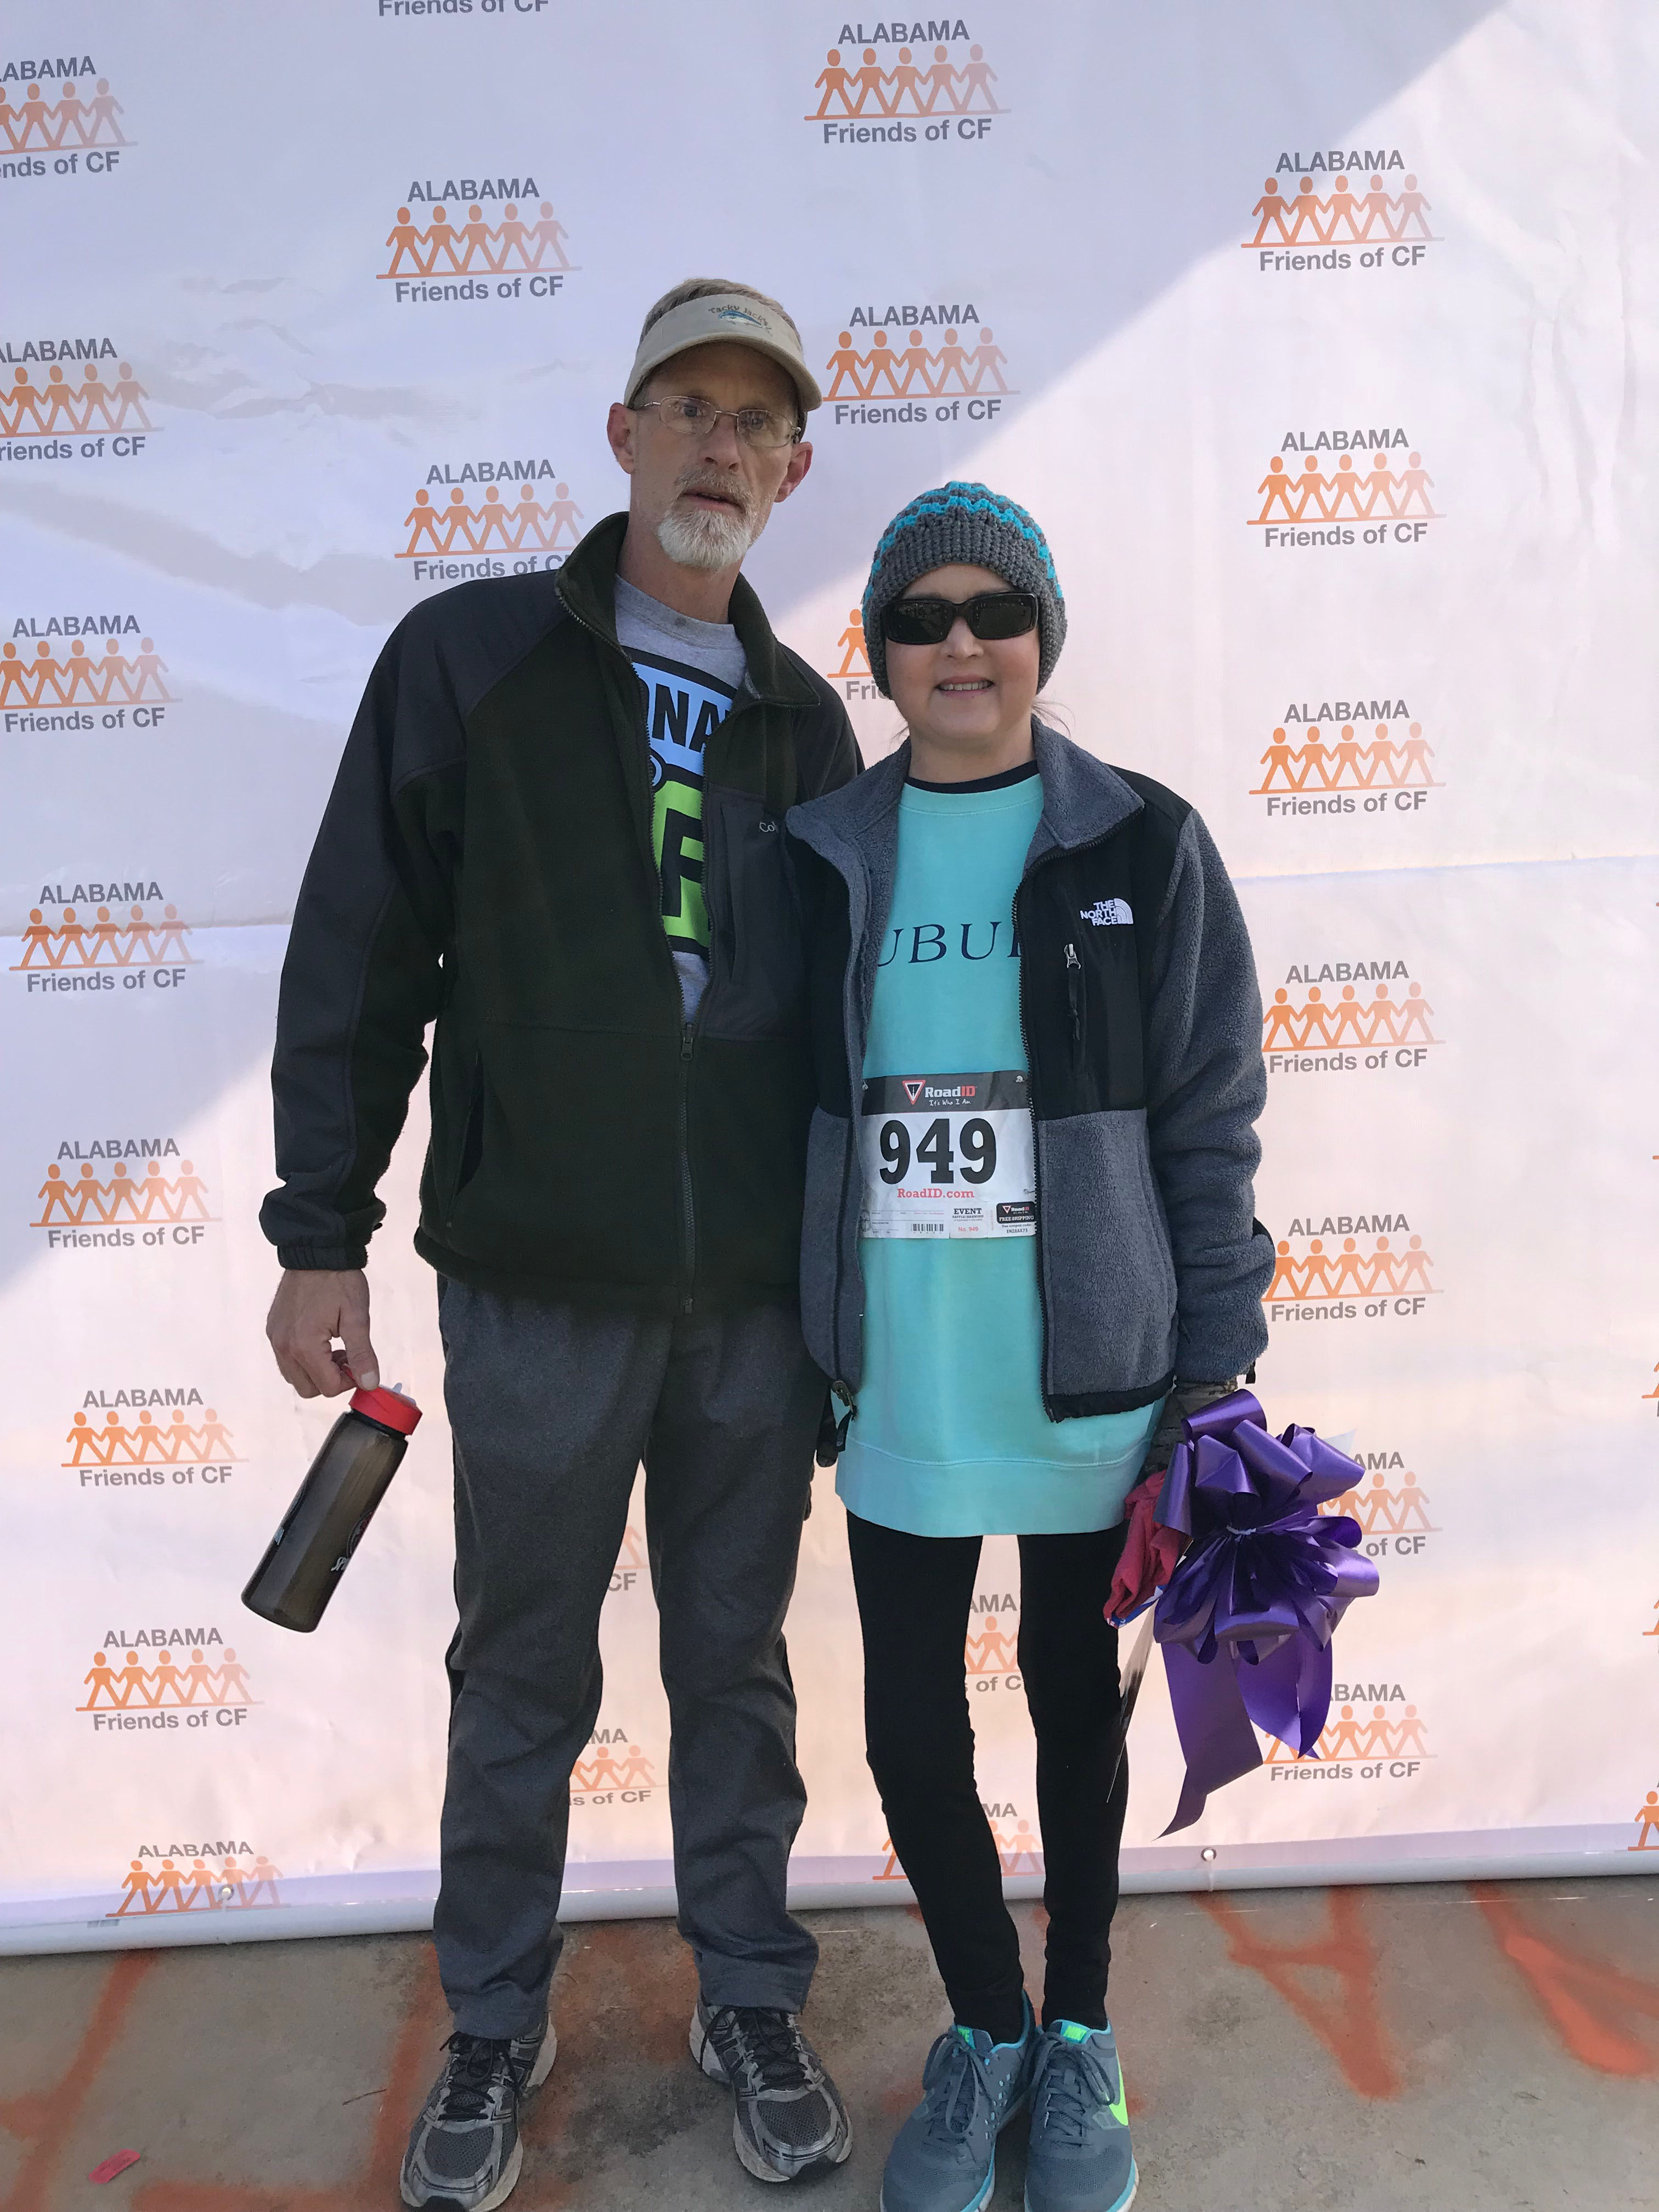 Woman completes Blow Away 5K 6 months after double-lung transplant